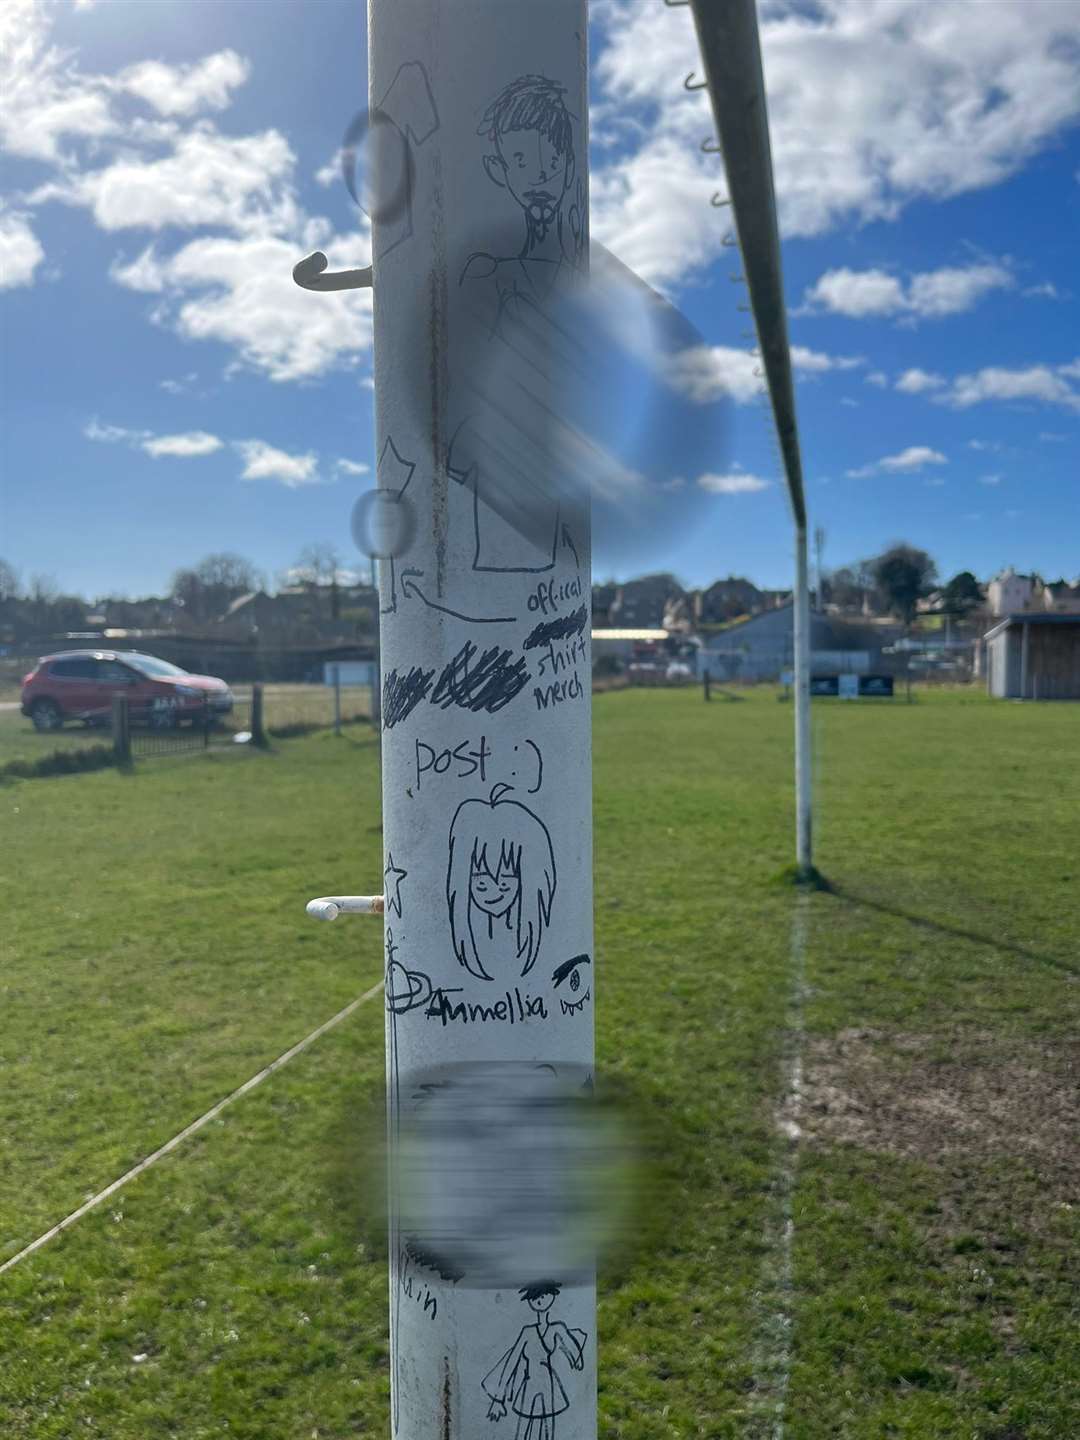 Explicit graffiti has been applied to the park's goalposts using a marker pen.